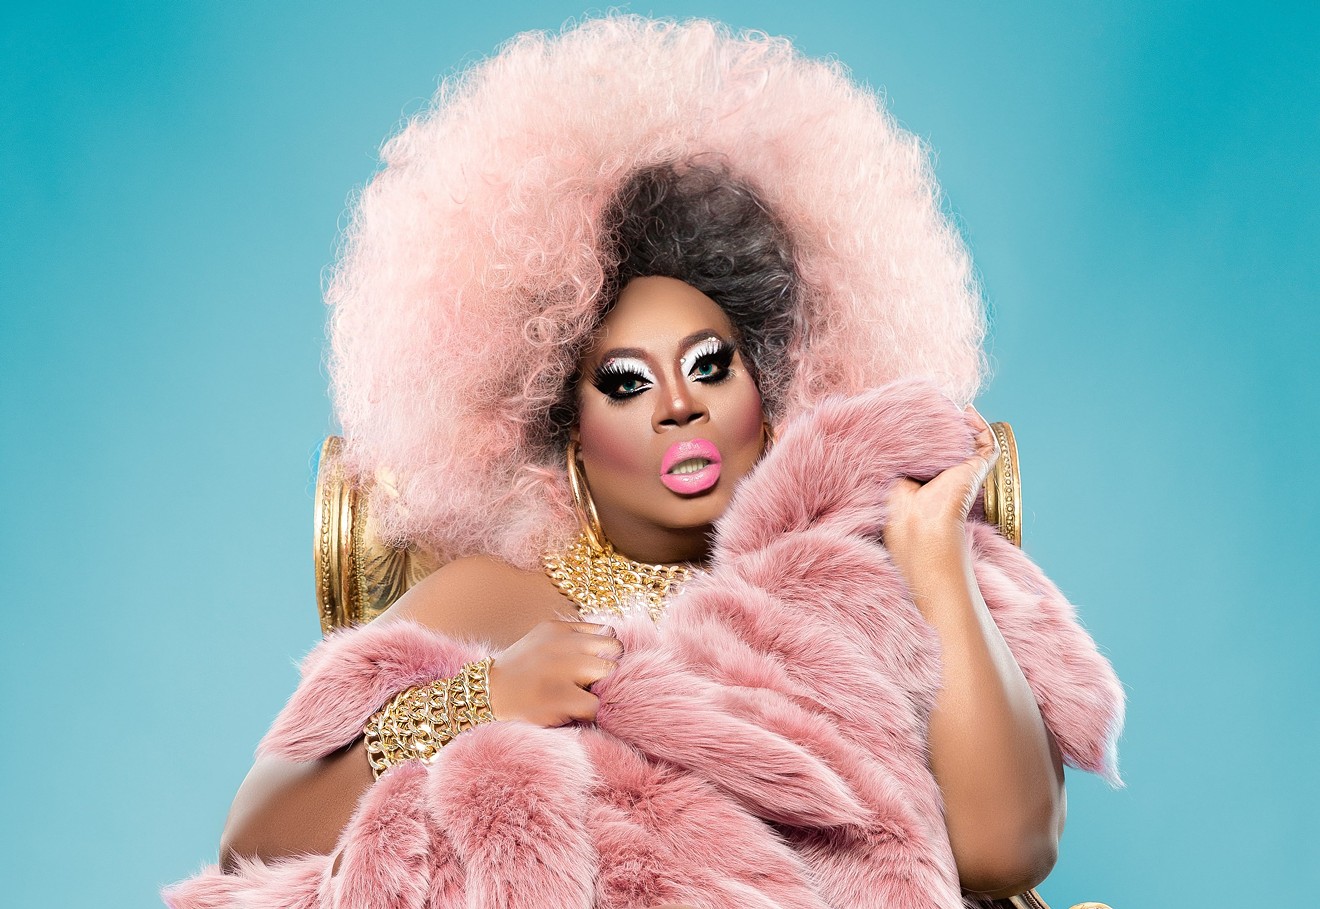 RuPaul's Drag Race alumna and South Florida drag legend Latrice Royale brings her cabaret show, Here's to Life, to Aventura.